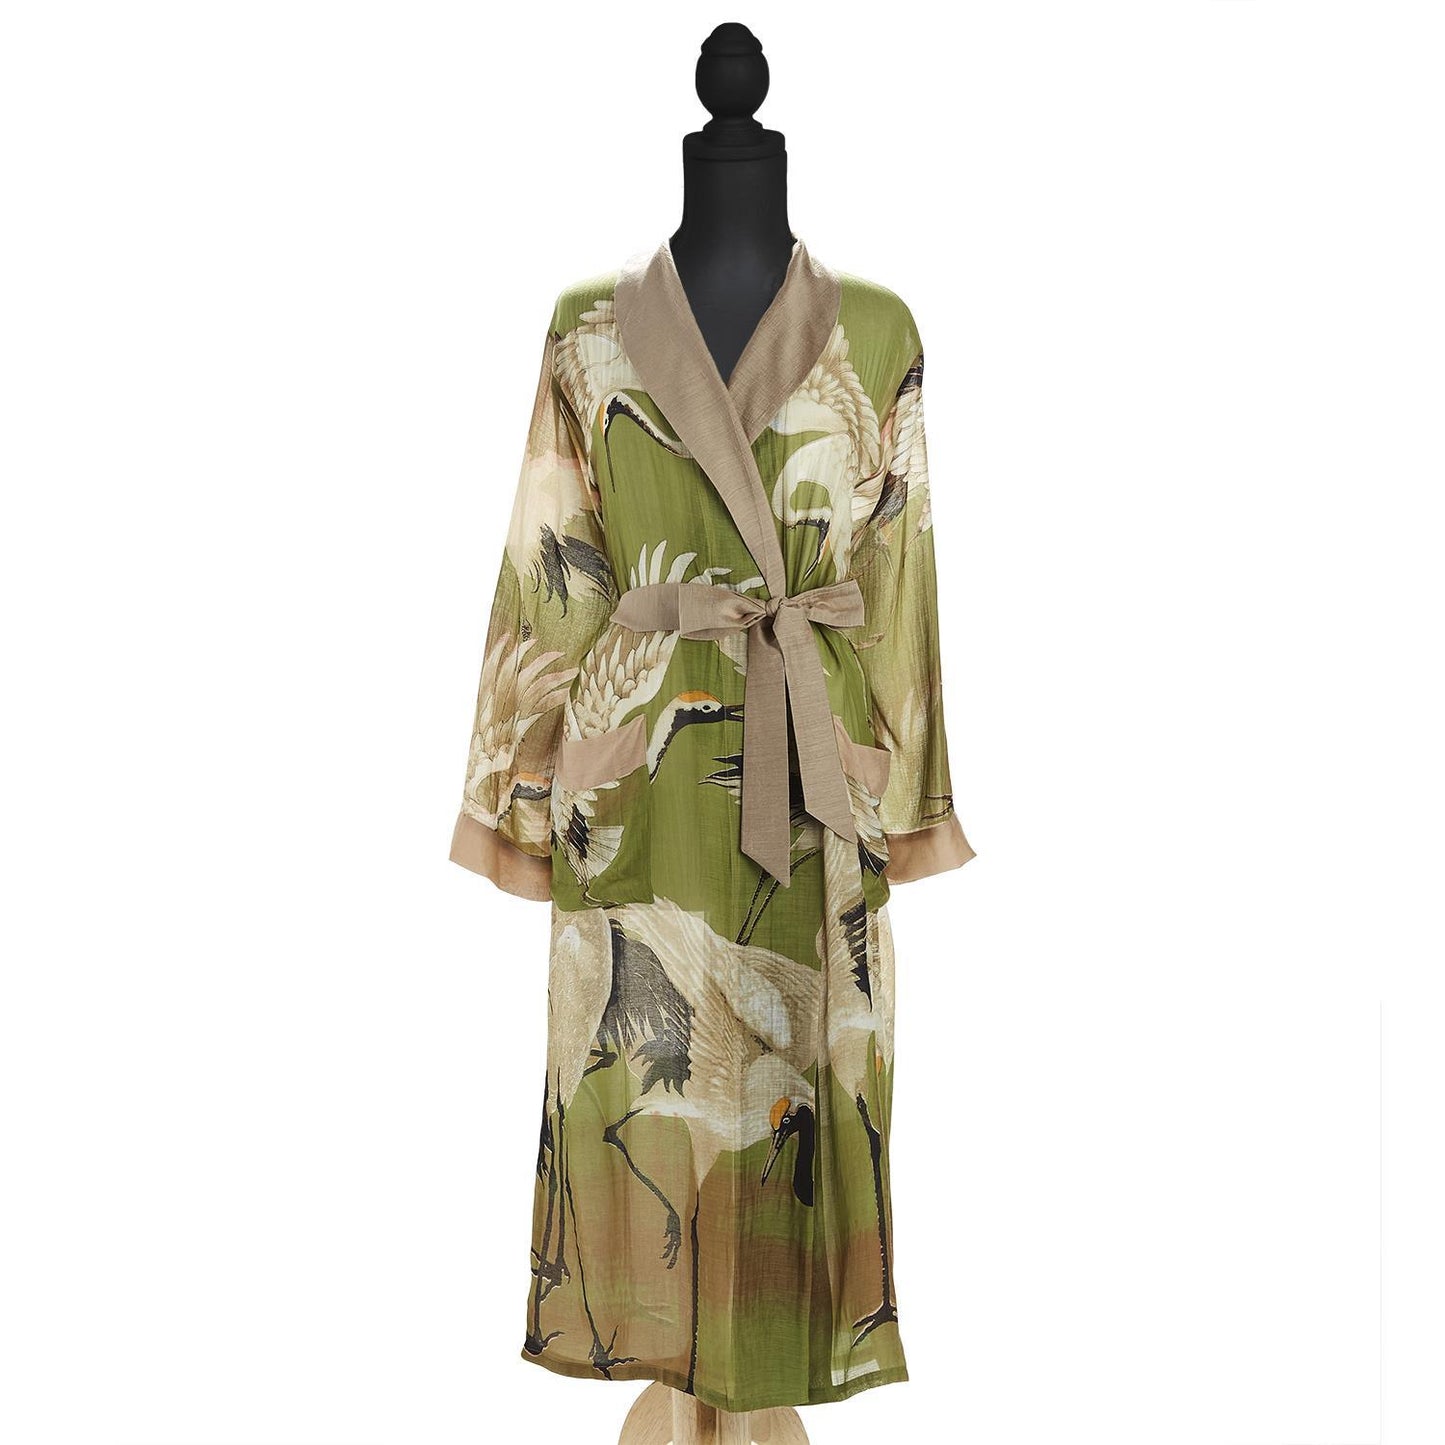 Heron Olive Robe Gown